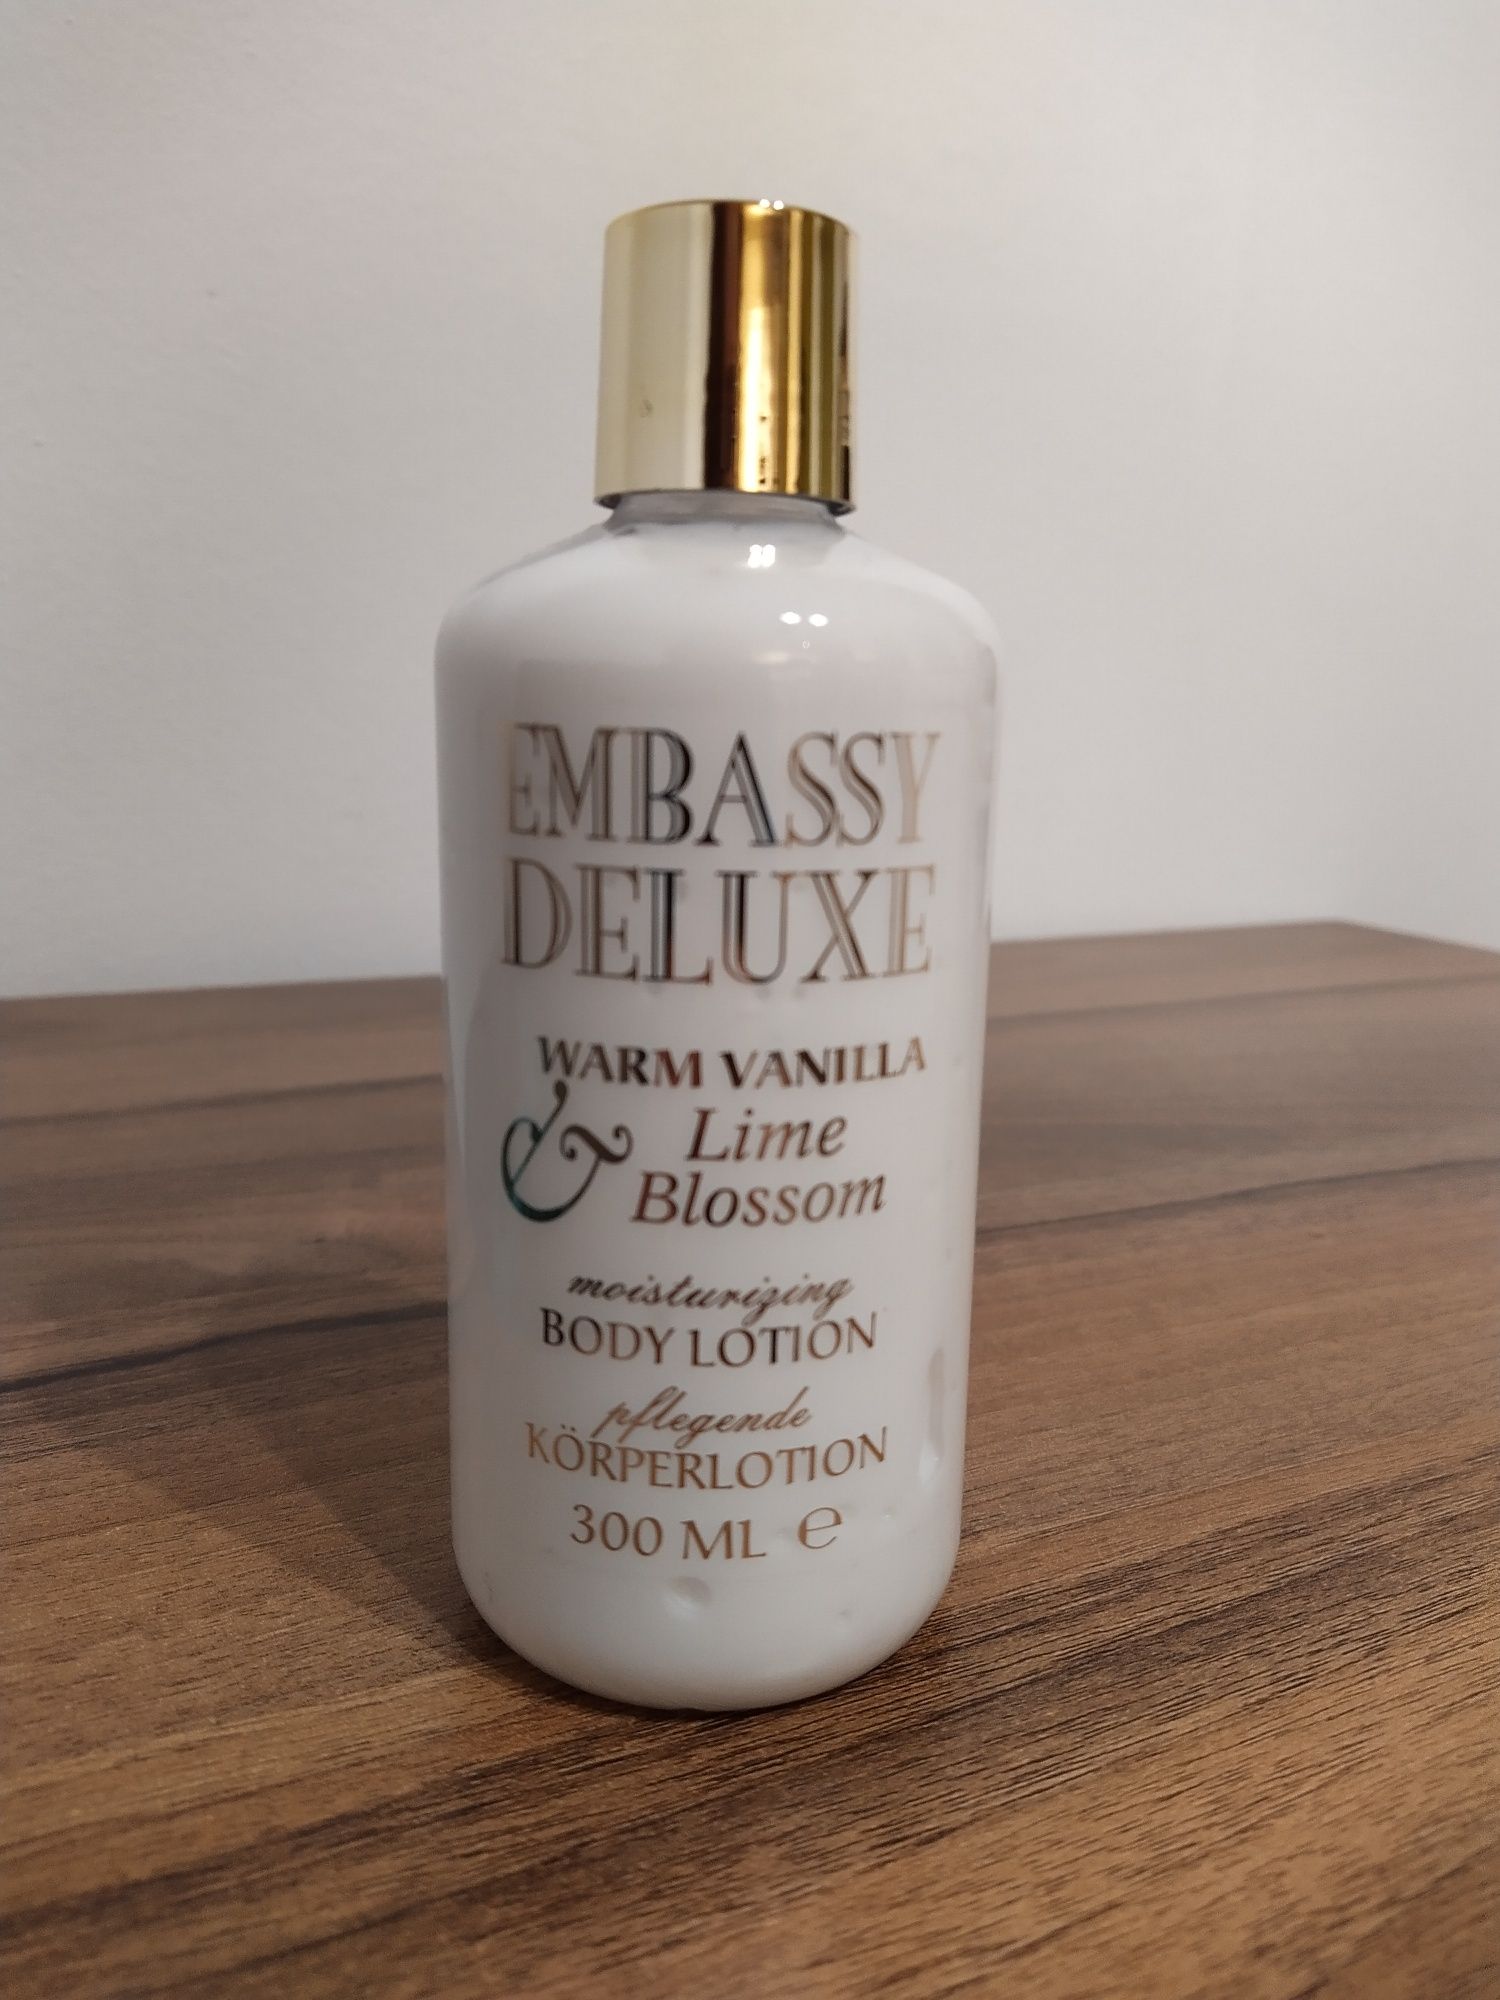 Embassy Deluxe Body Lotion